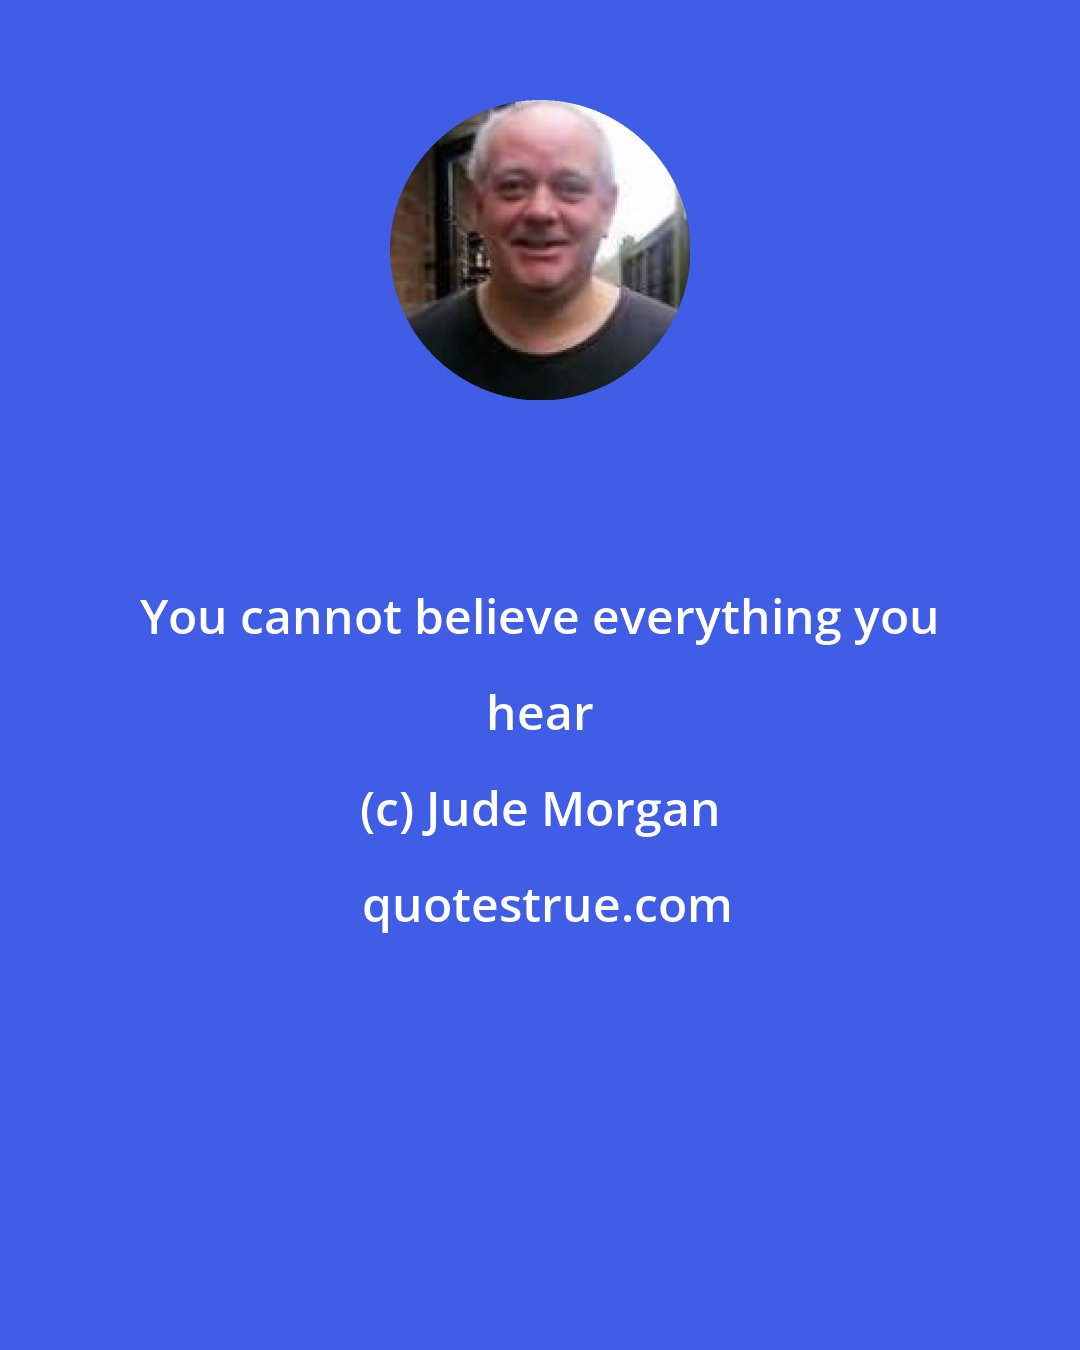 Jude Morgan: You cannot believe everything you hear